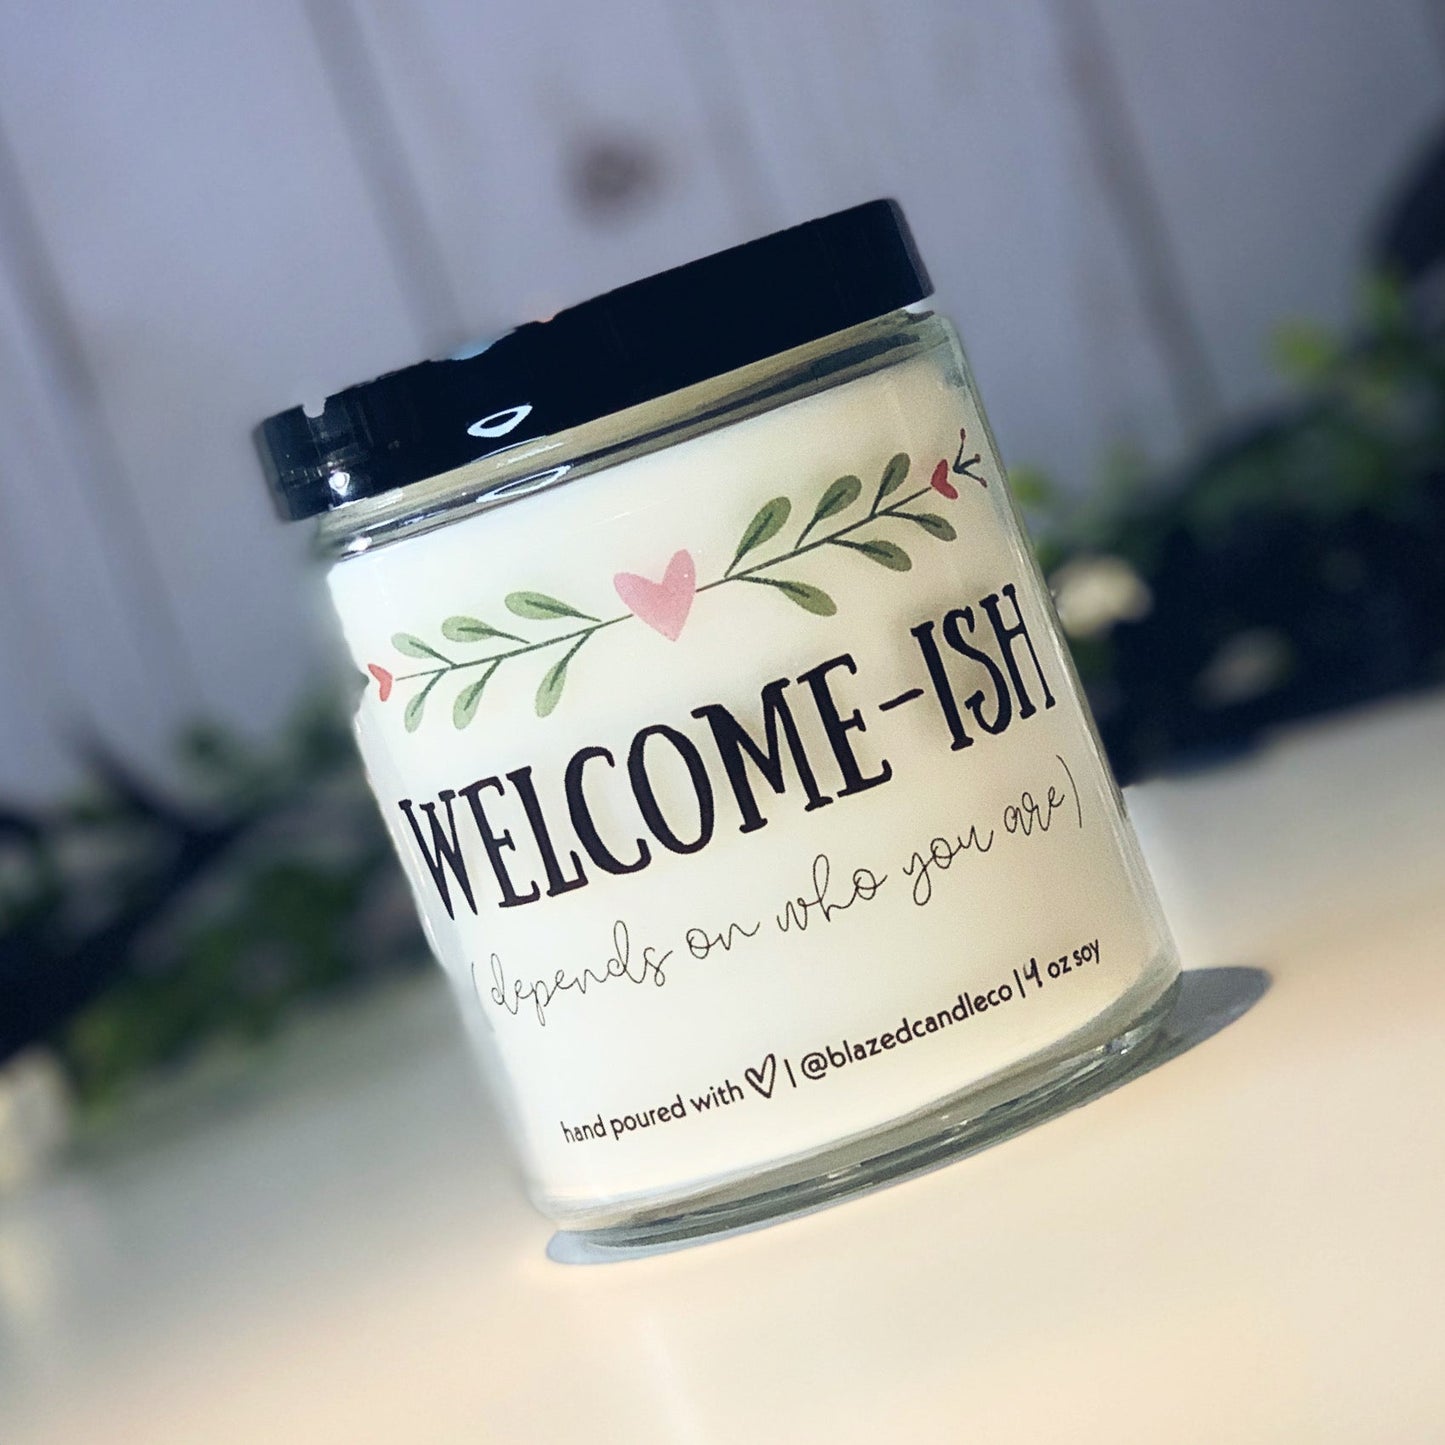 Weclome-ish (Depends on Who You Are) Candle